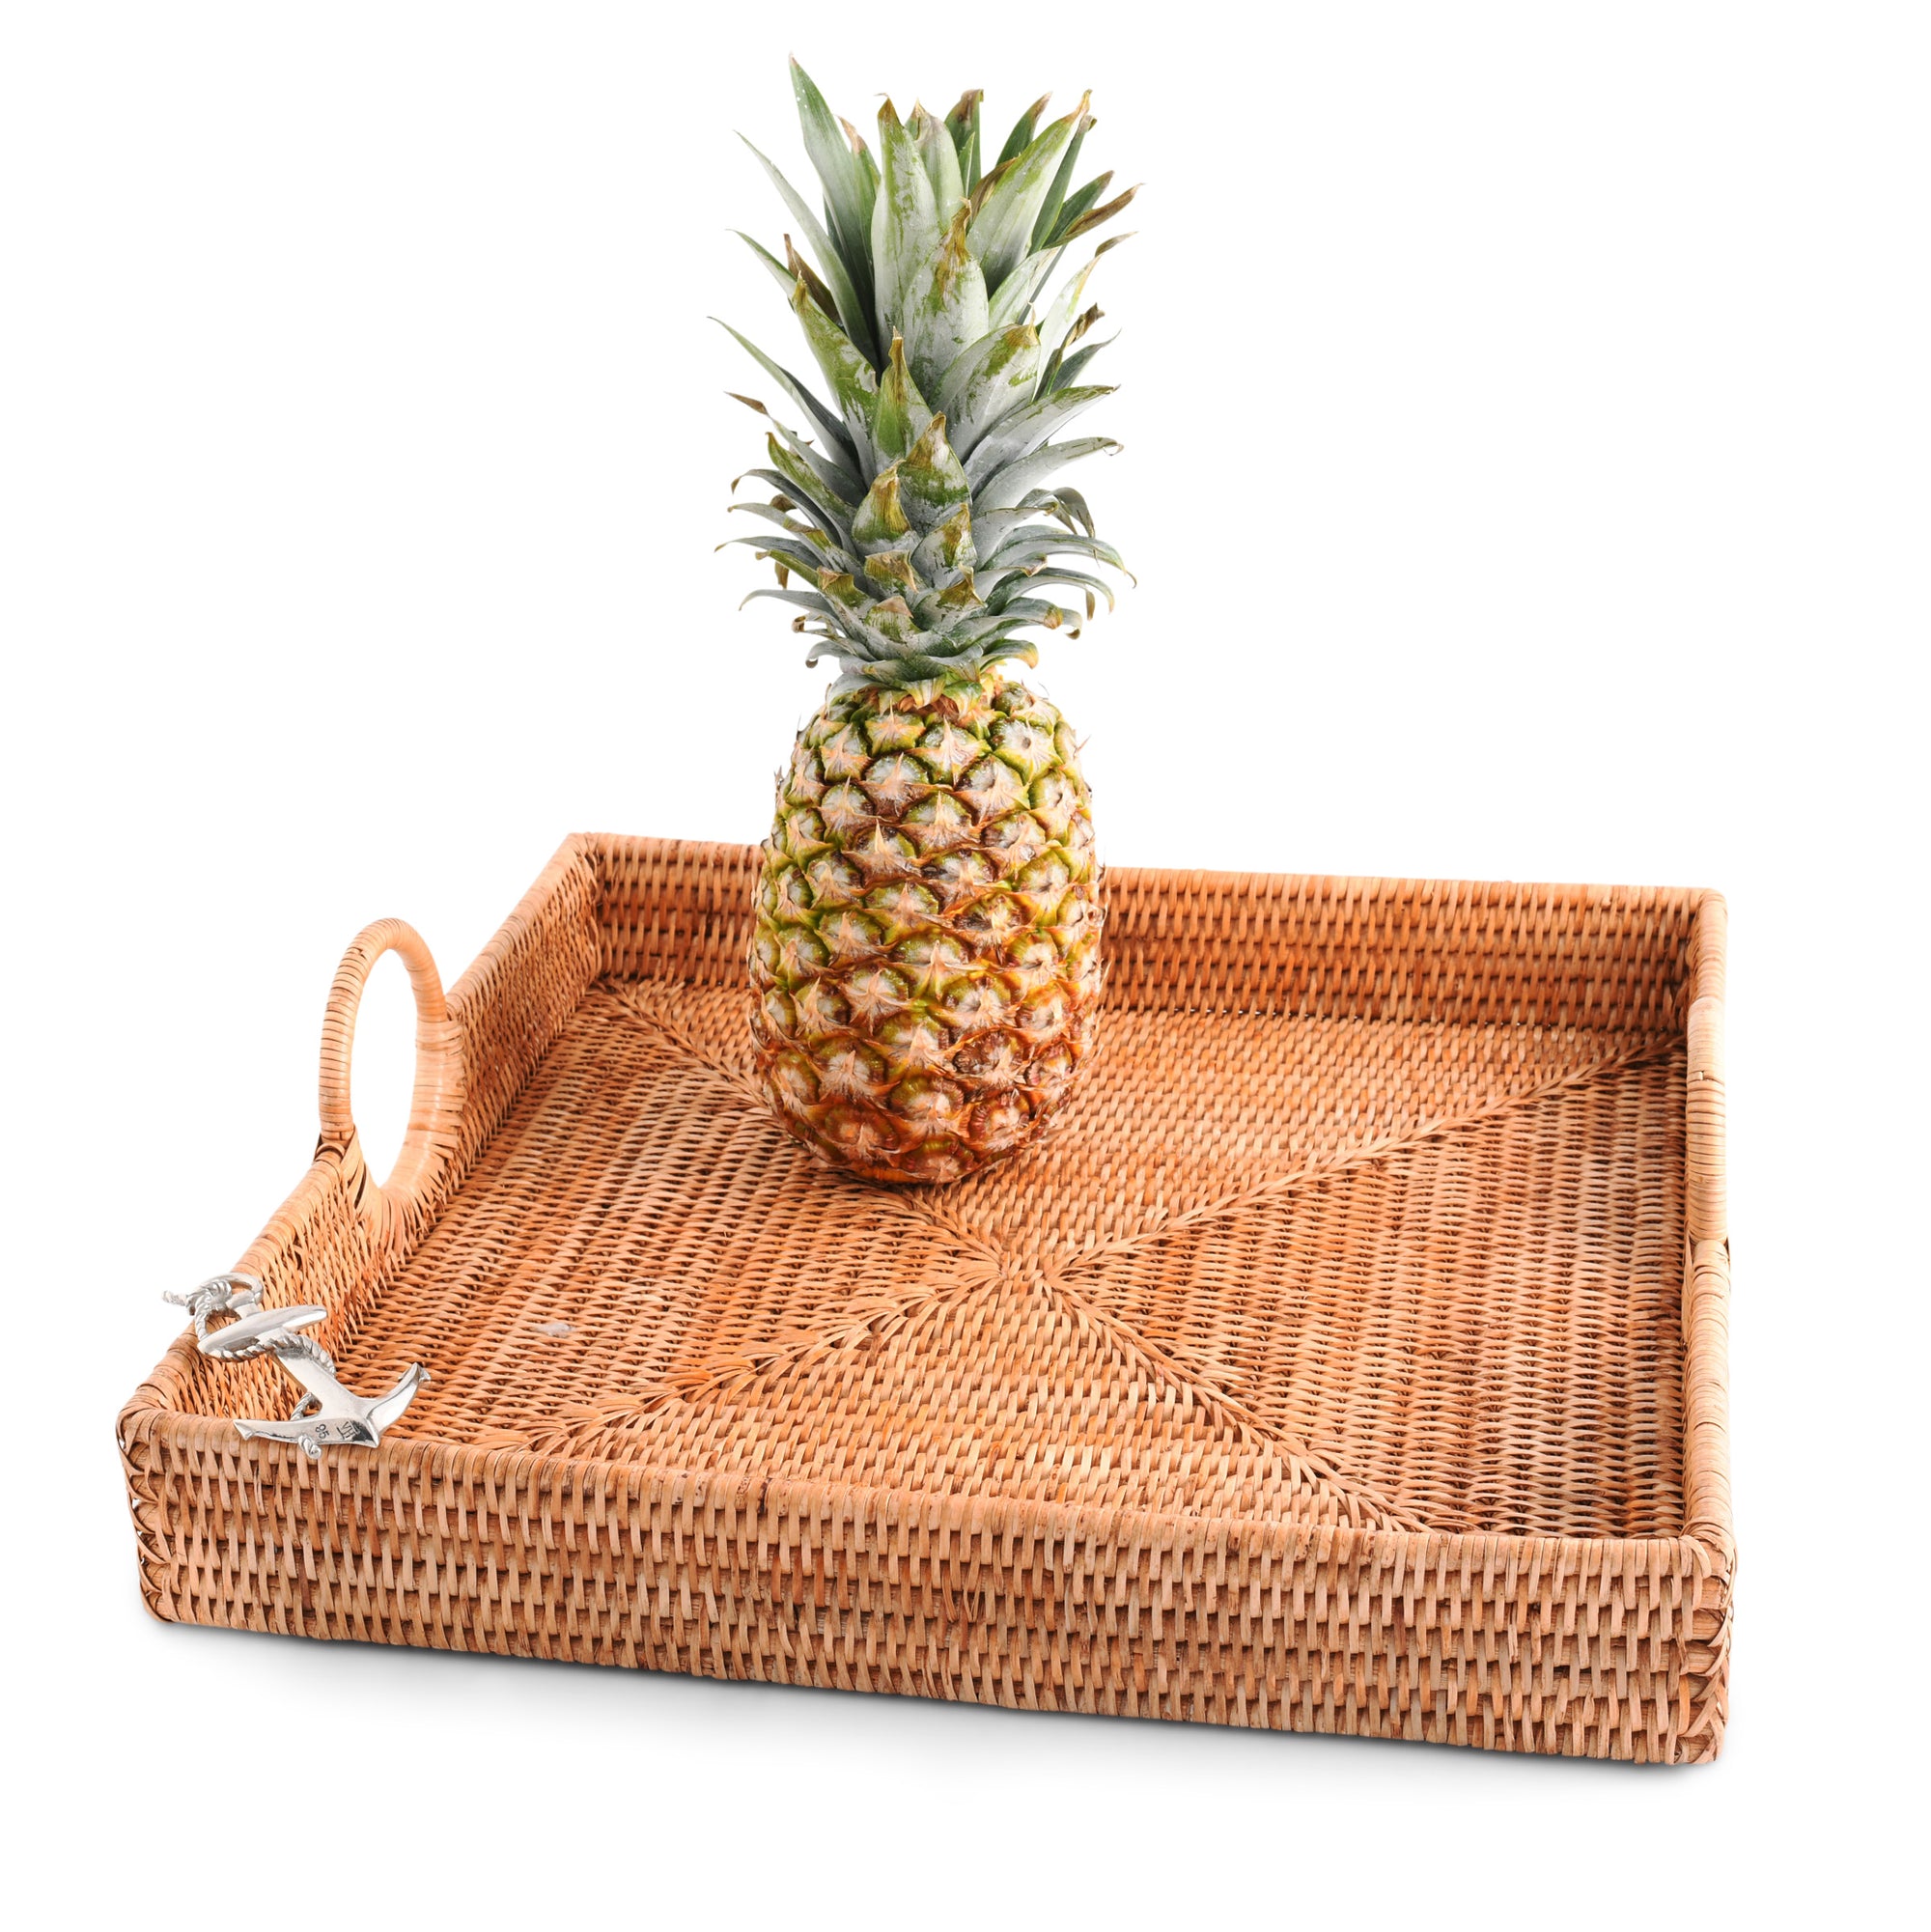 Vagabond House Anchor Hand Woven Wicker Rattan Large Square Tray Product Image